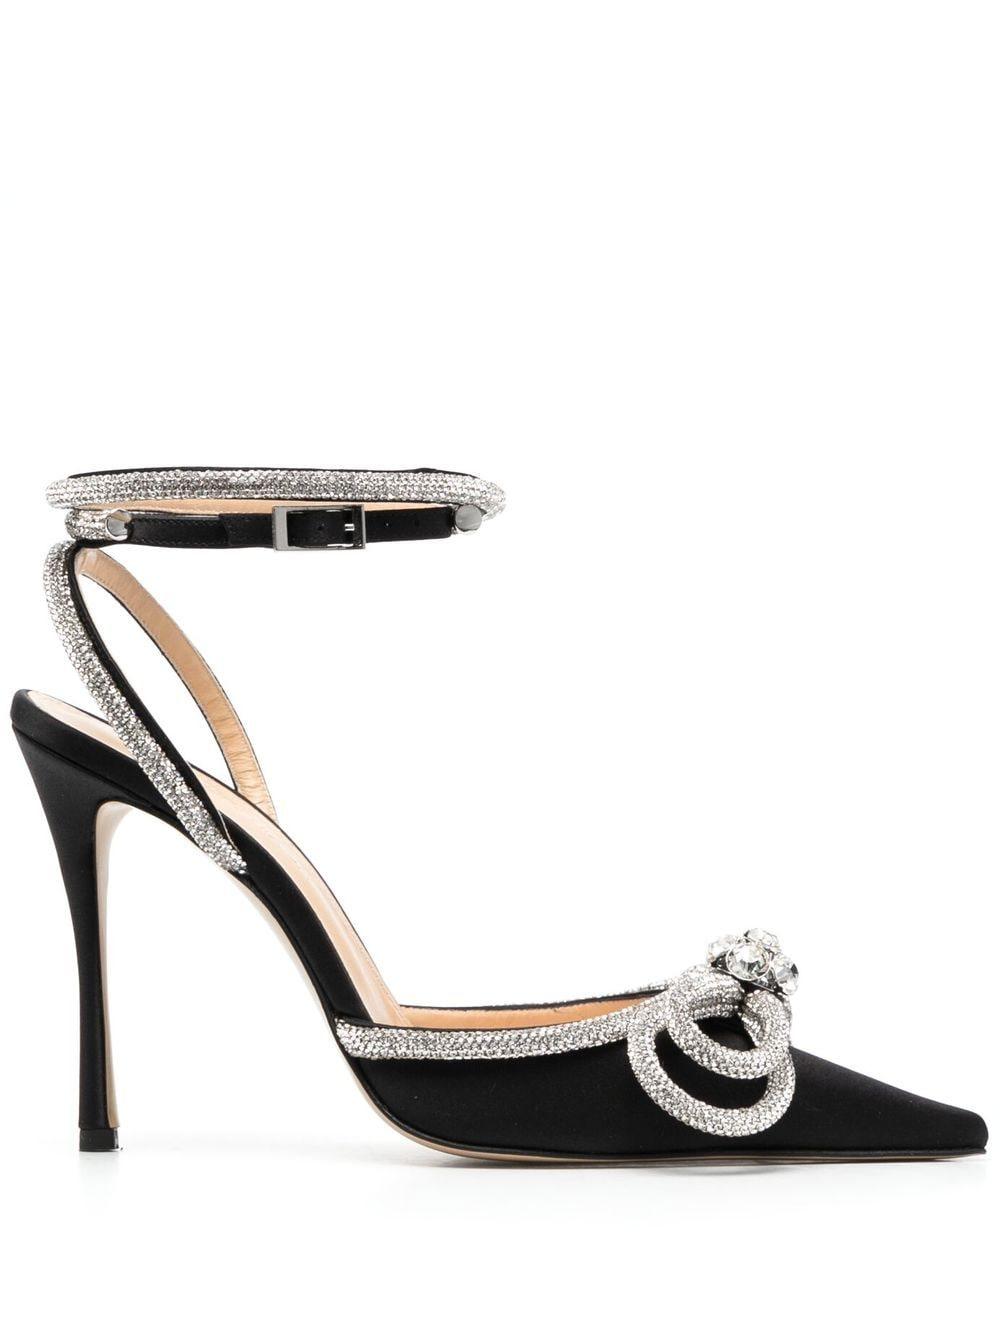 Mach & Mach Double Bow 115mm Crystal-embellished Pumps in Black | Lyst